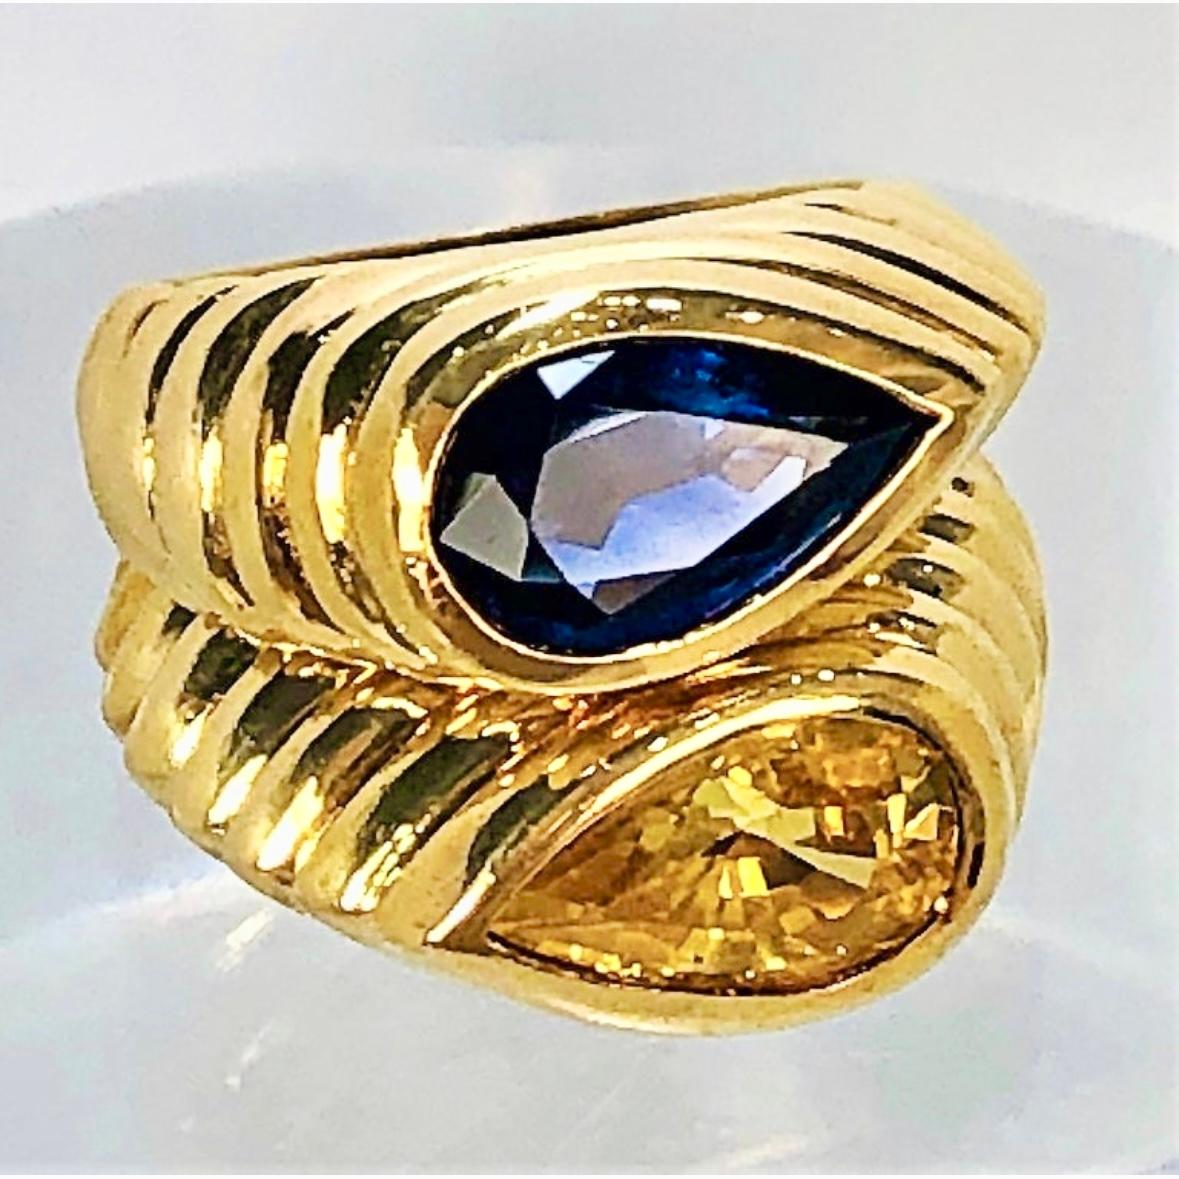 Made of 18K fluted, yellow gold, this heavyweight pair of 
tailored rings by NIVA are bezel set with two faceted pear 
shaped sapphires. The blue sapphire weighs approximately 
2.00CT and the yellow sapphire weighs approximately 2.40CT. 
Both rings